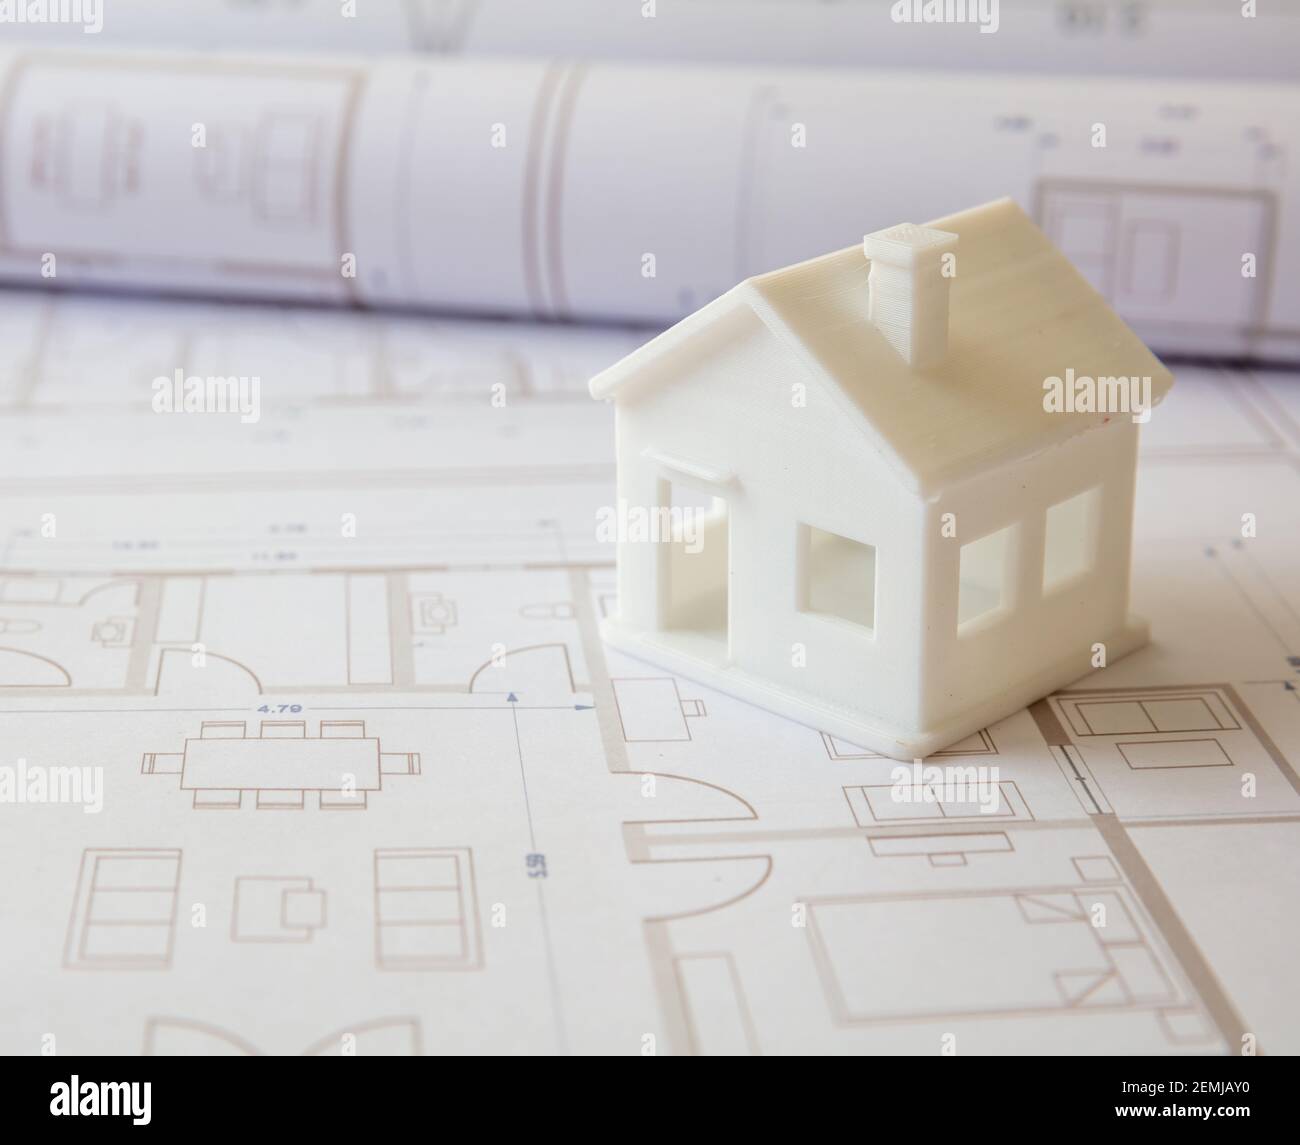 Construction design blueprints concept. Housing project drawings and architectural house model on an office desk. Architect engineer work space Stock Photo